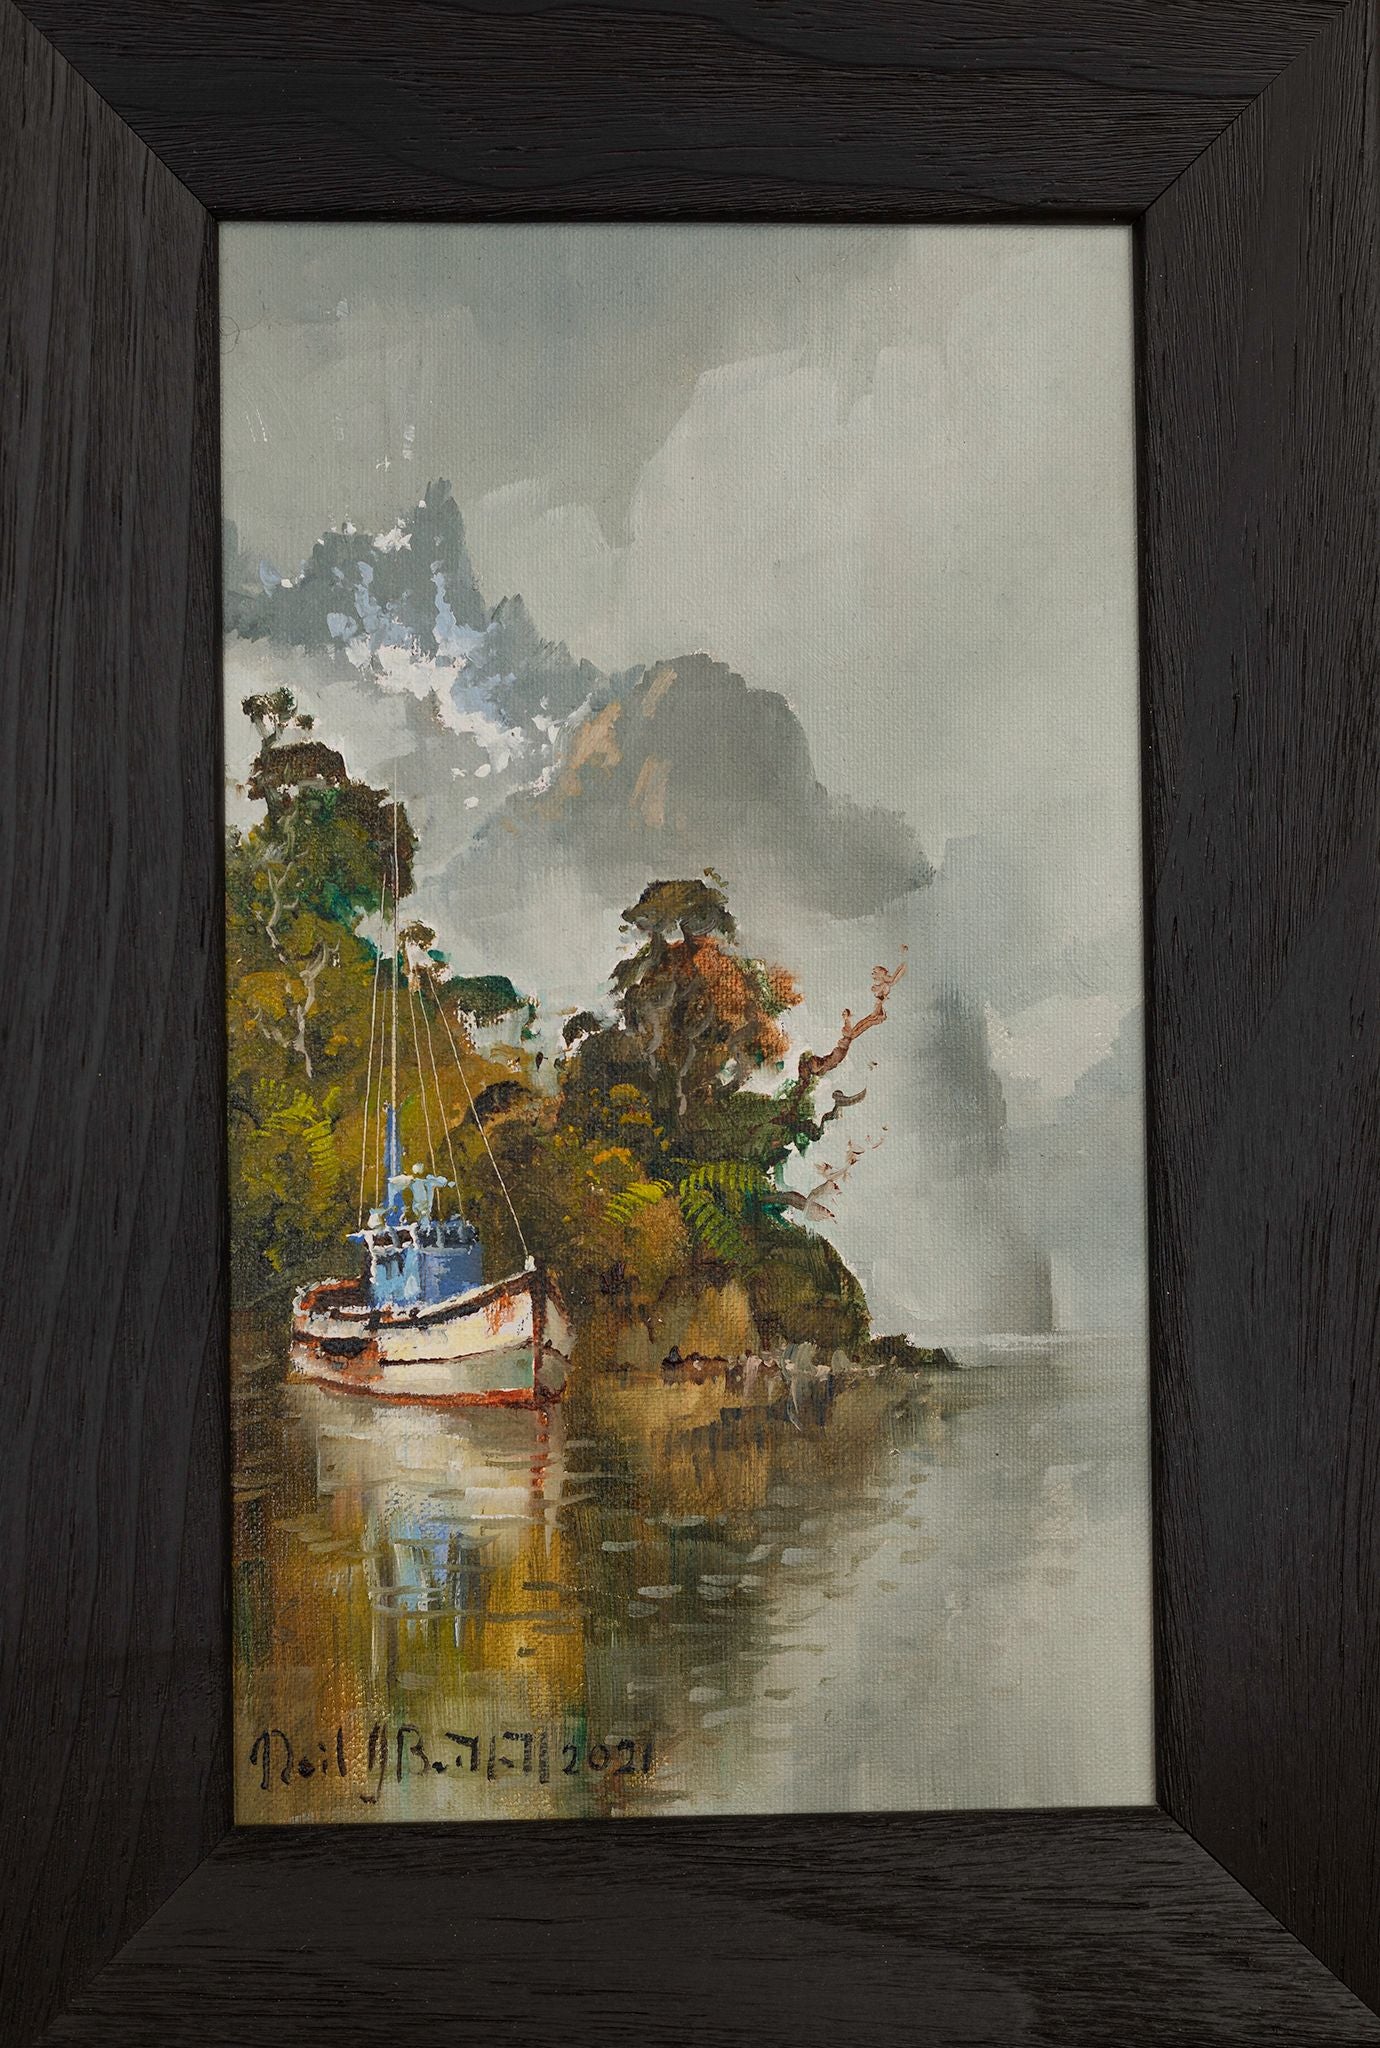 Framed Oil Painting by renowned landscape artist Neil J Bartlett of Fishing Boat at Fiordland  Silver Fern Gallery